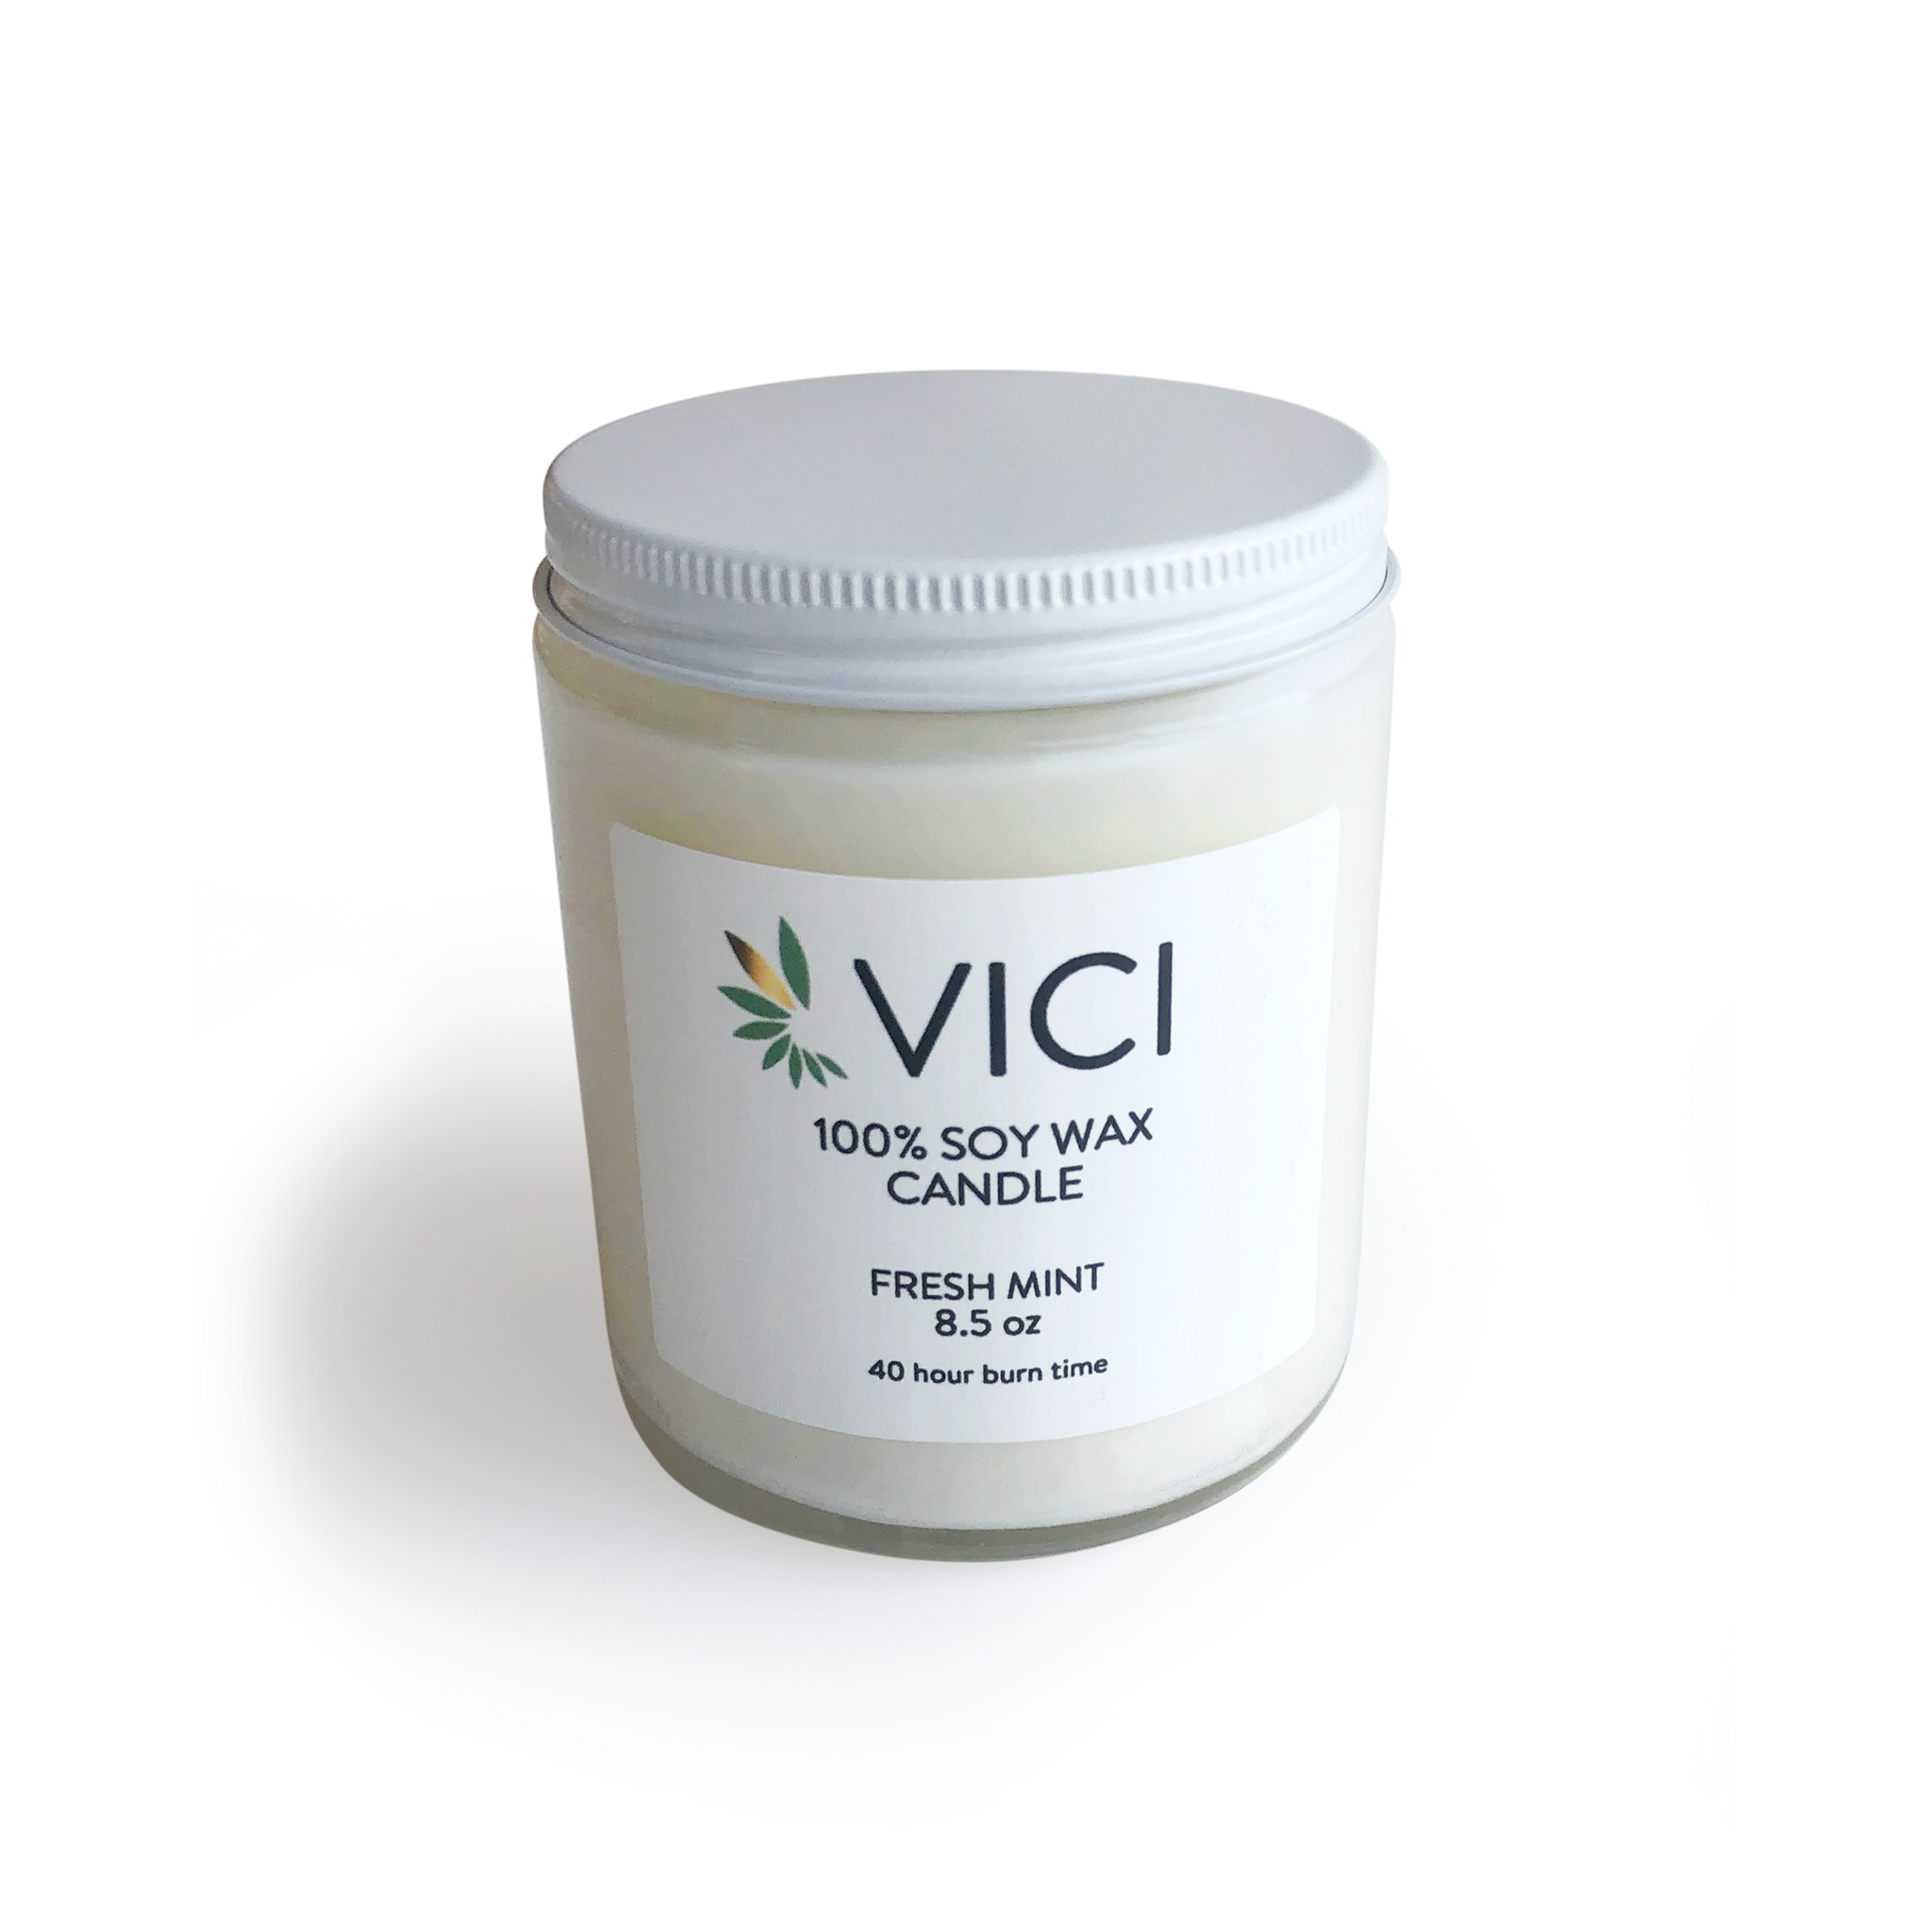 VICI Soy Candles - 8.5 oz Glass